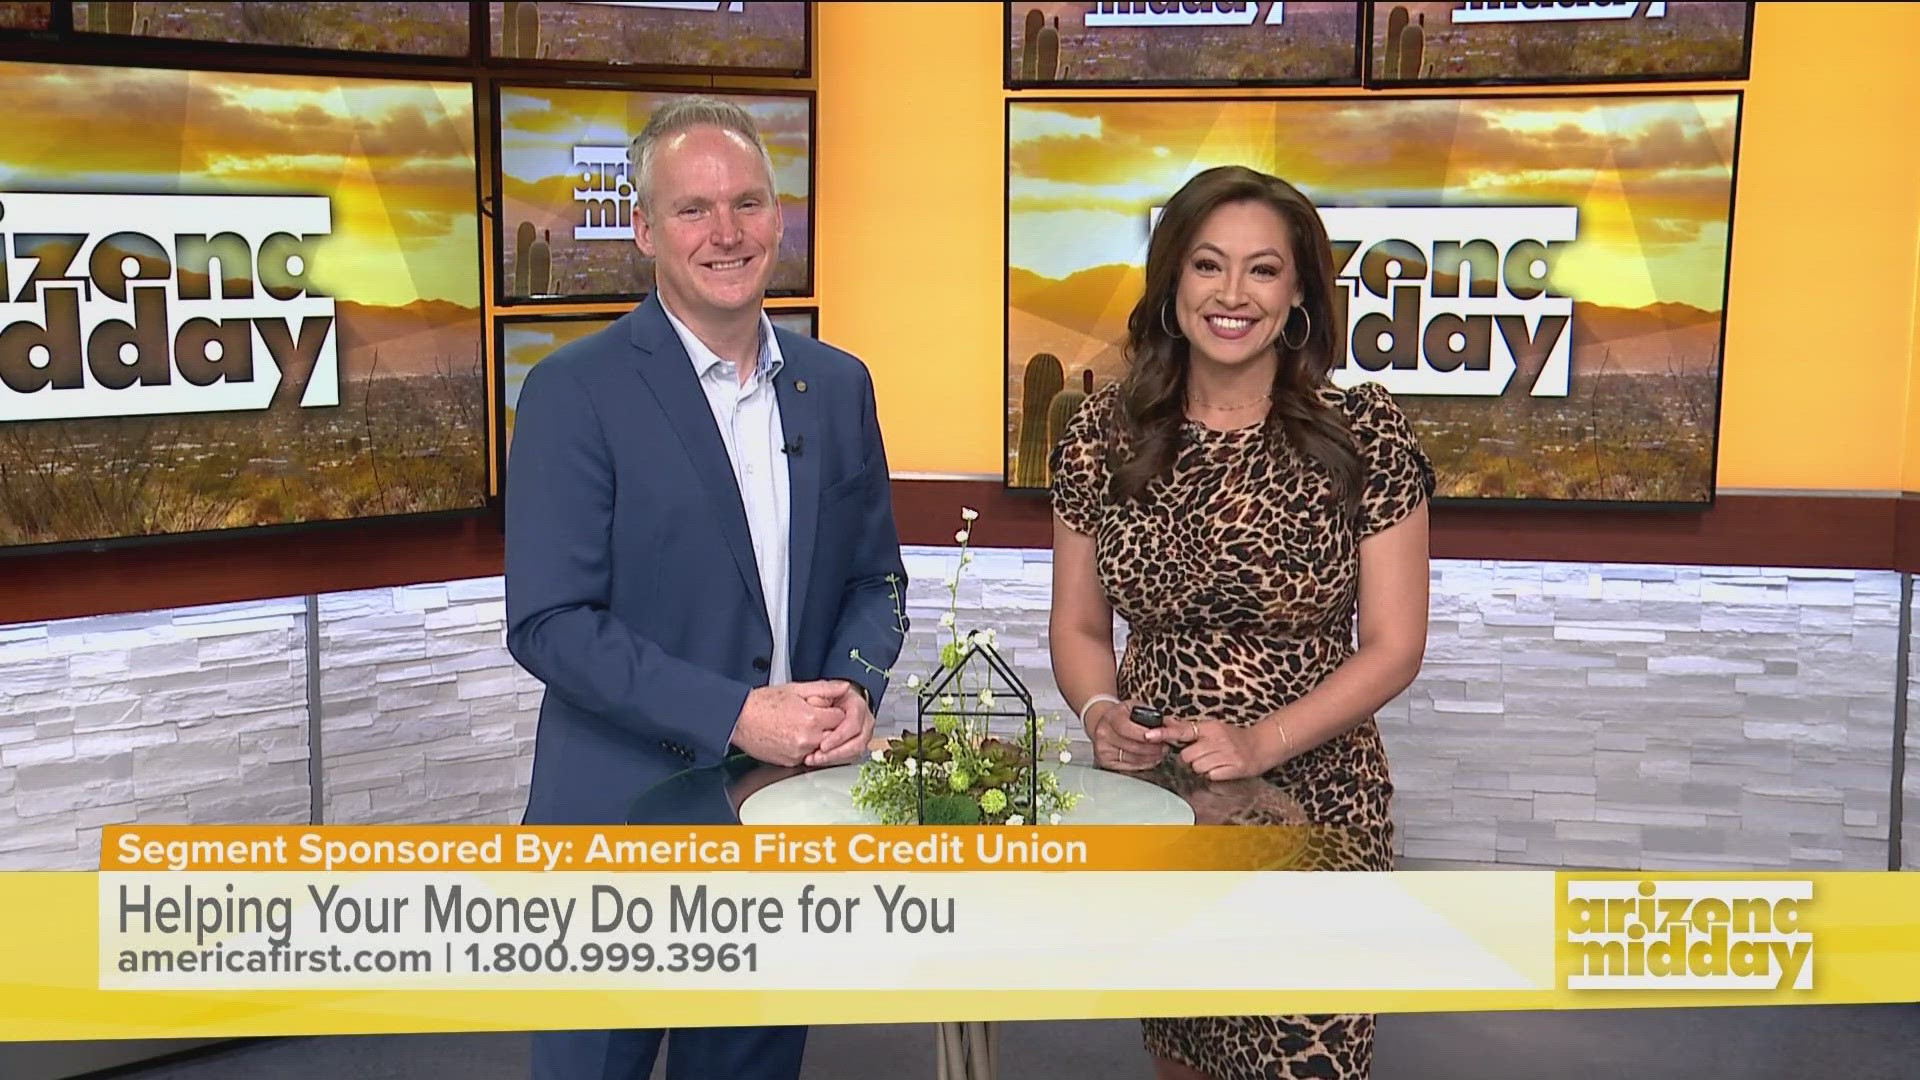 Dave Nellis of America First Credit Union shares how they help your money do more for you with dedicated savings accounts and ideas to stretch that tax refund!